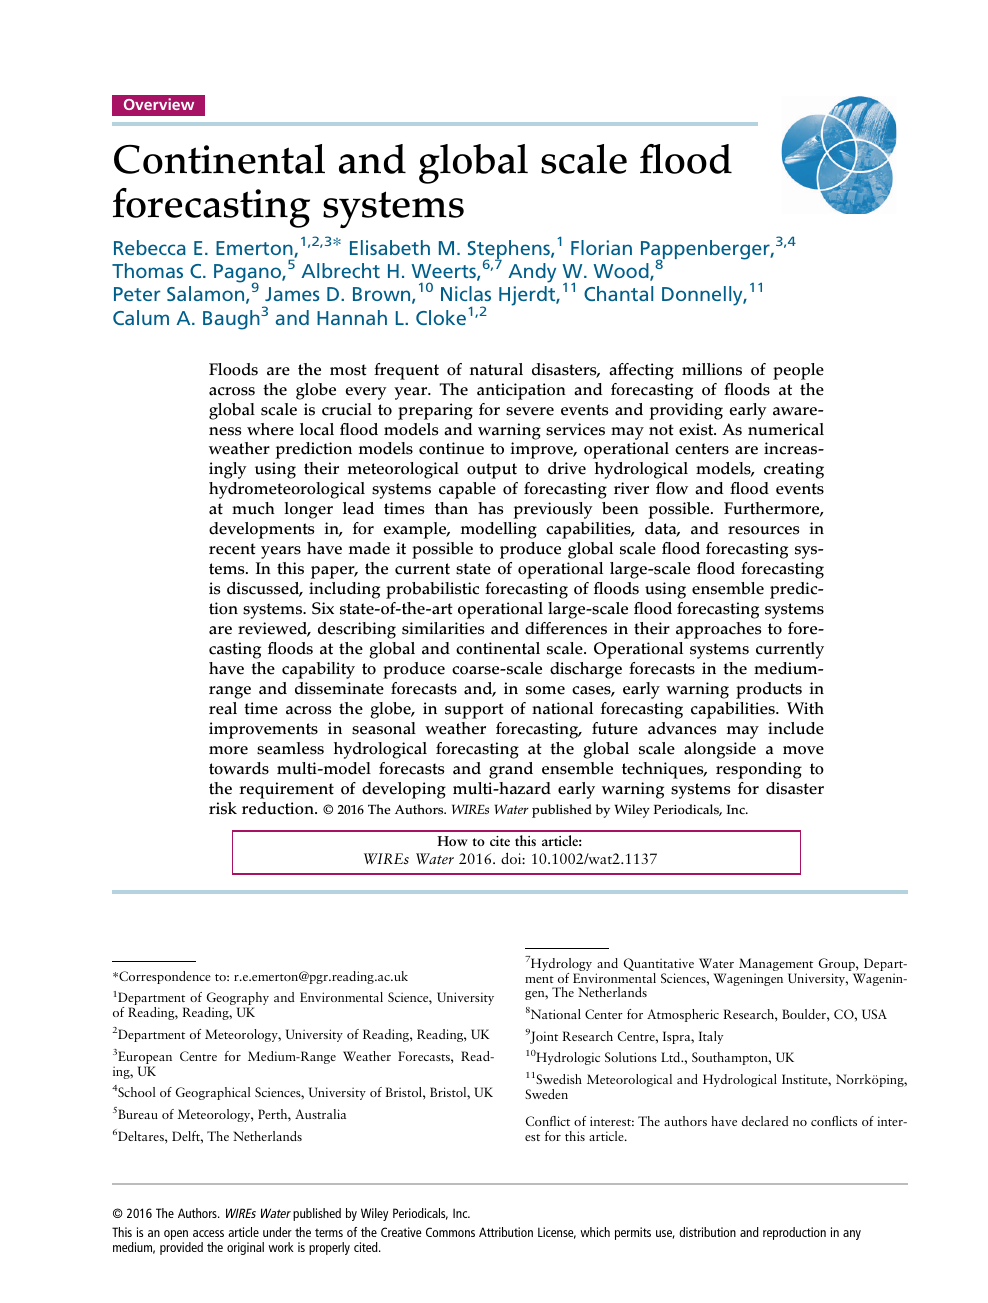 Continental And Global Scale Flood Forecasting Systems Topic Of Research Paper In Earth And Related Environmental Sciences Download Scholarly Article Pdf And Read For Free On Cyberleninka Open Science Hub